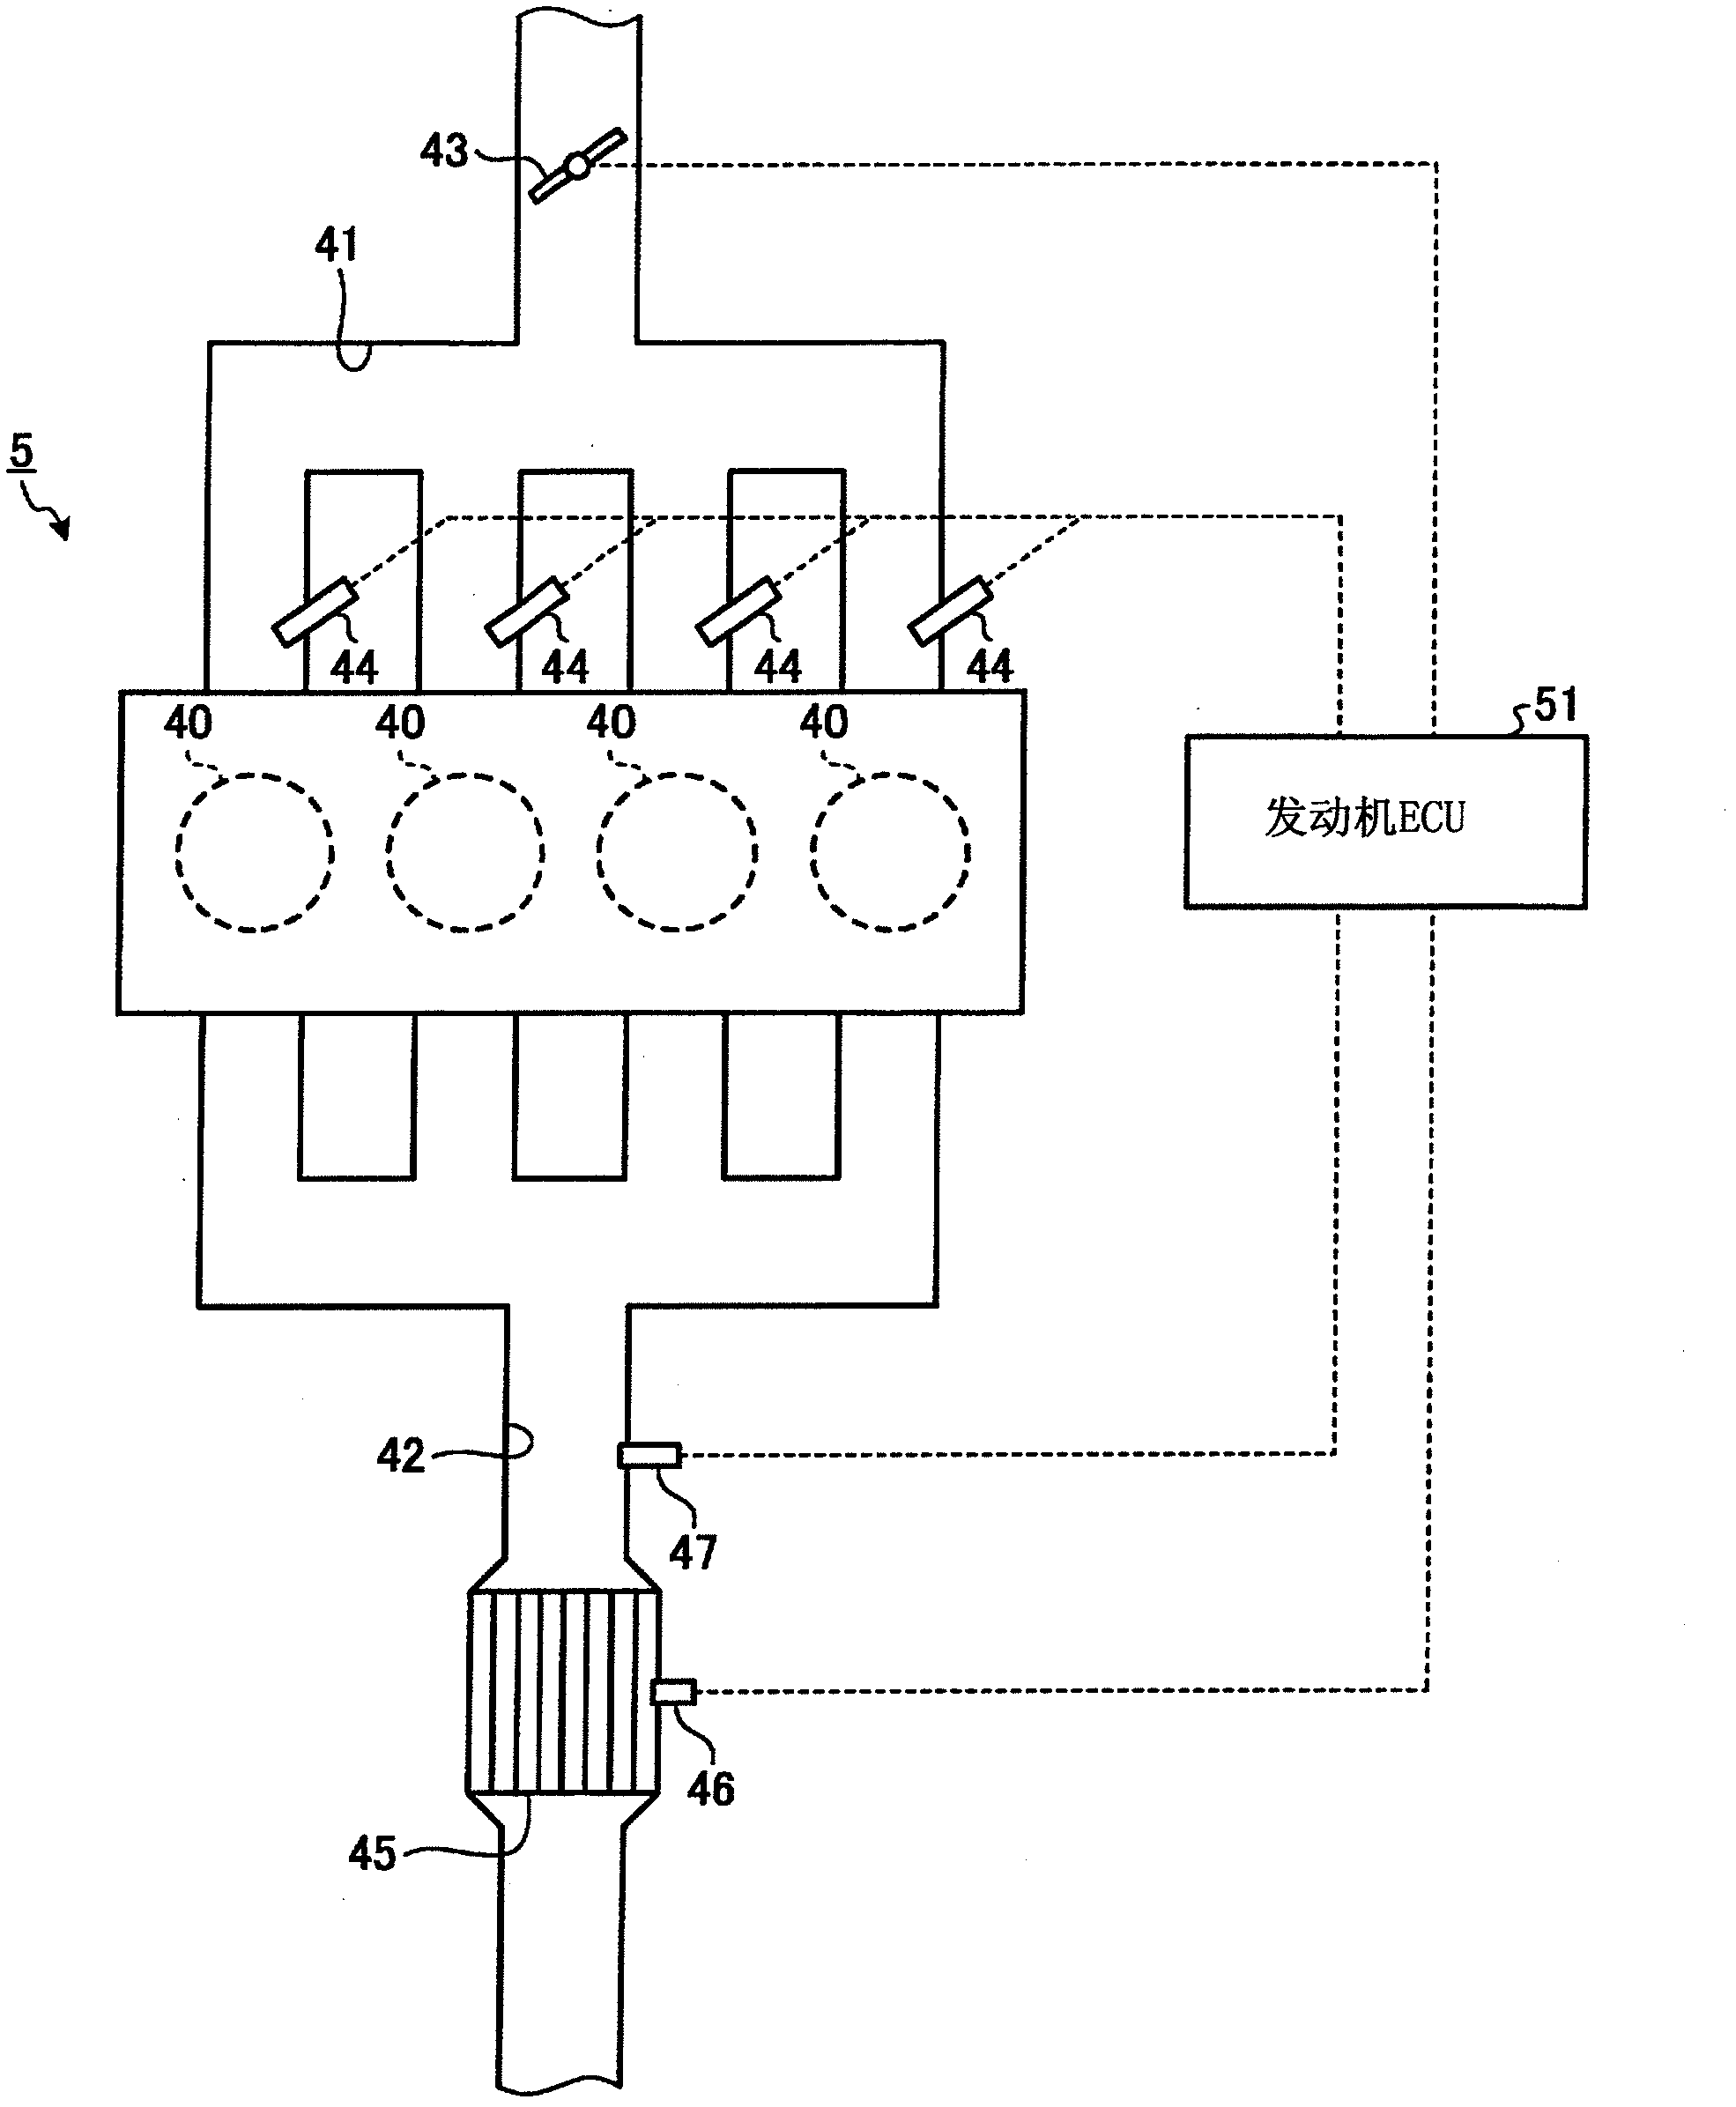 Damping control device